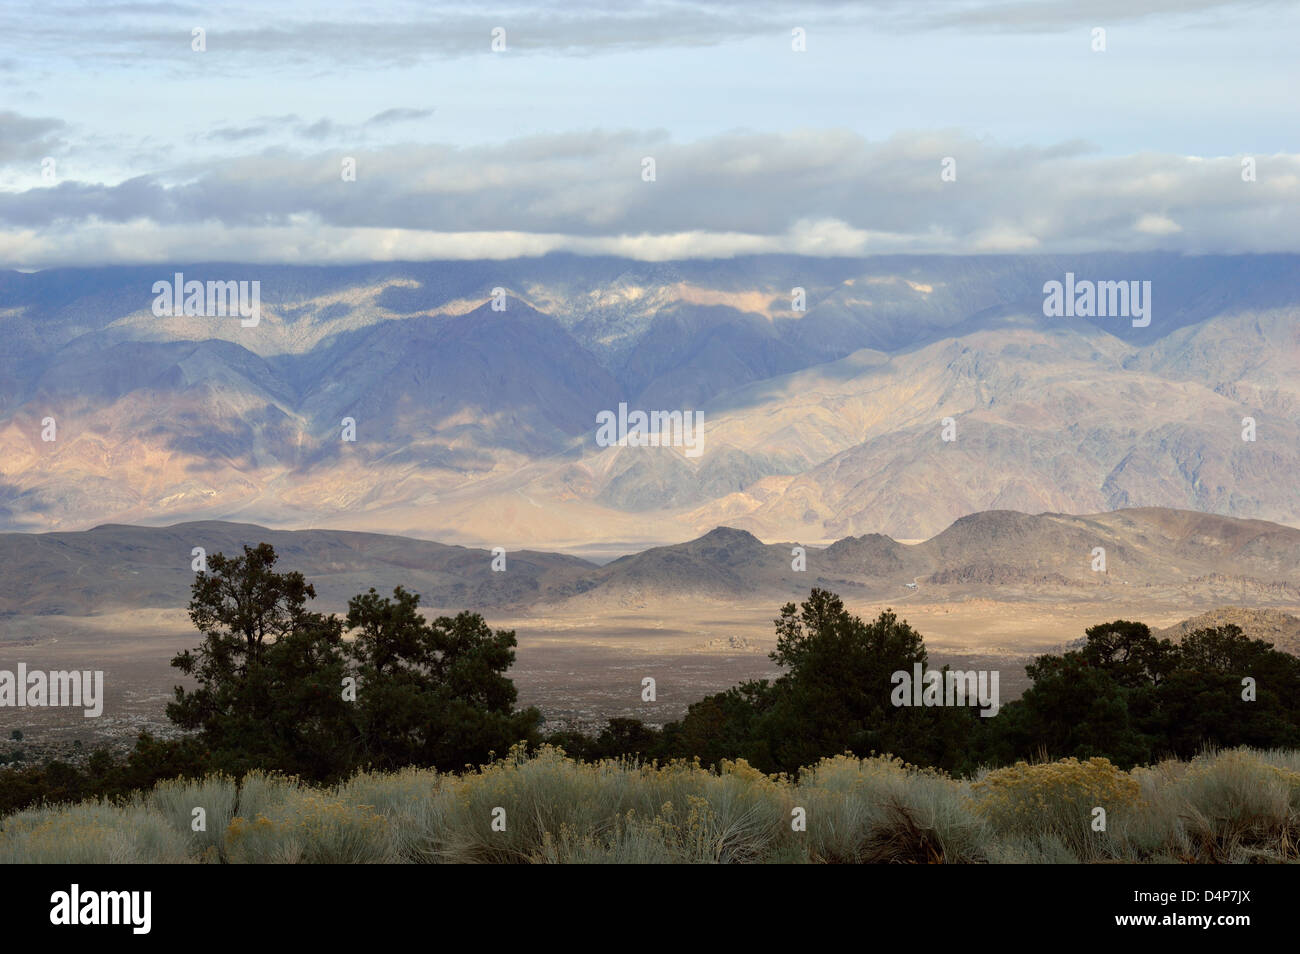 Upper reaches of Whitney Portal road outside of Lone Pine, California, View across the Owens valley. Stock Photo